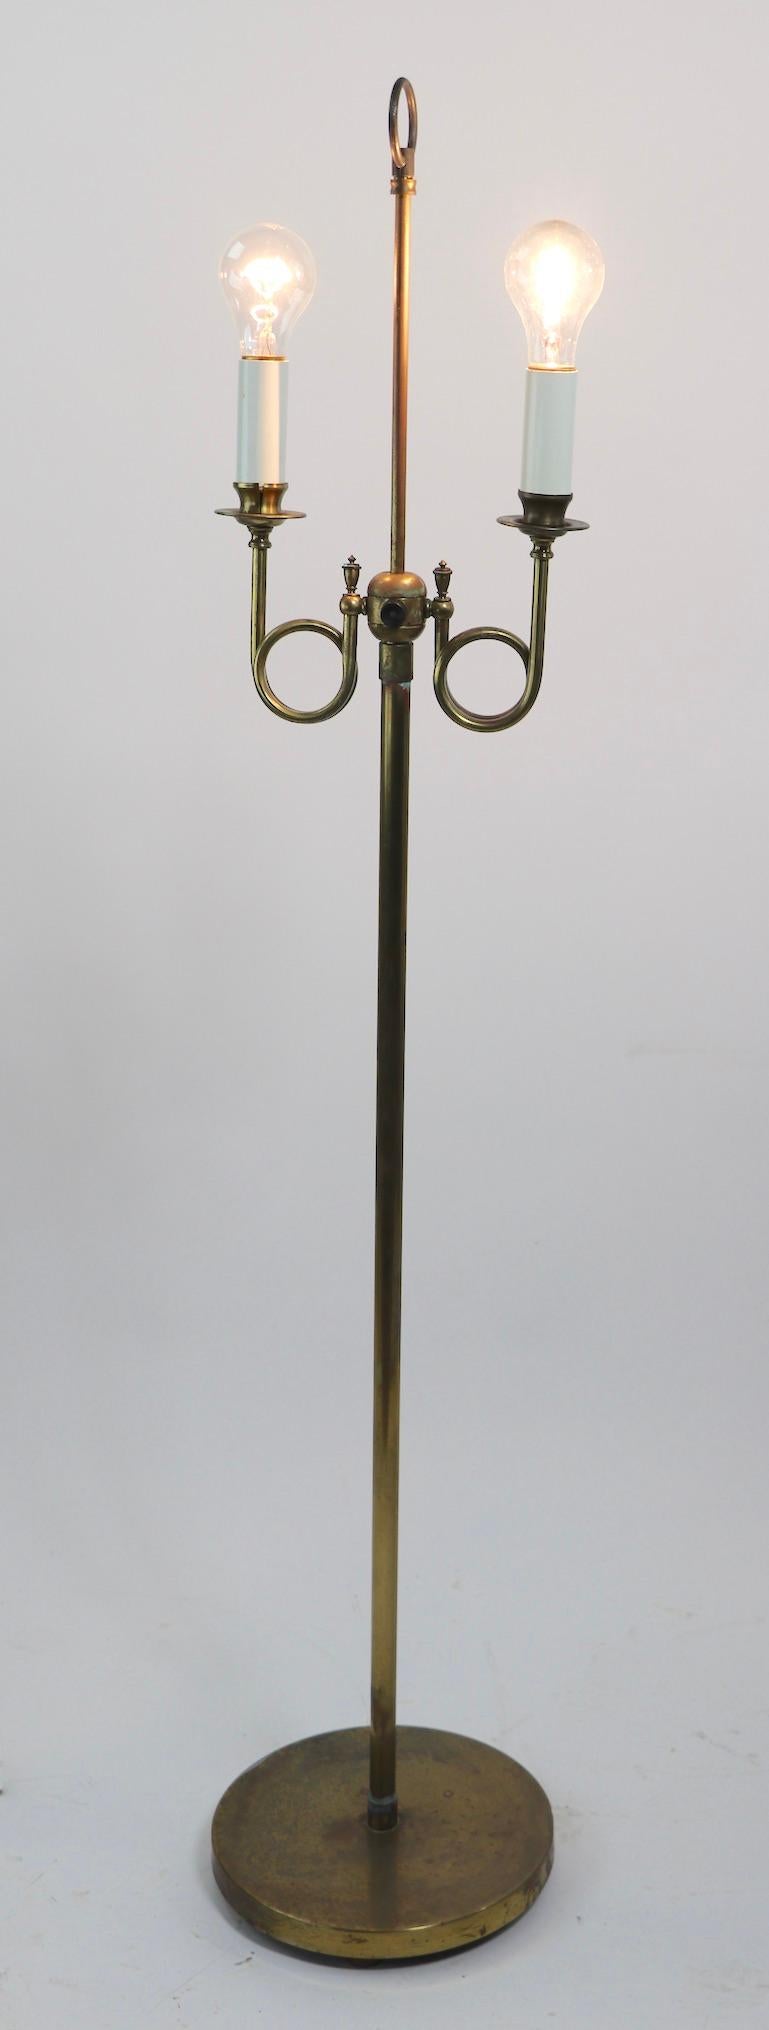 American Decorative Formal Style Brass 2-Light Floor Lamp For Sale